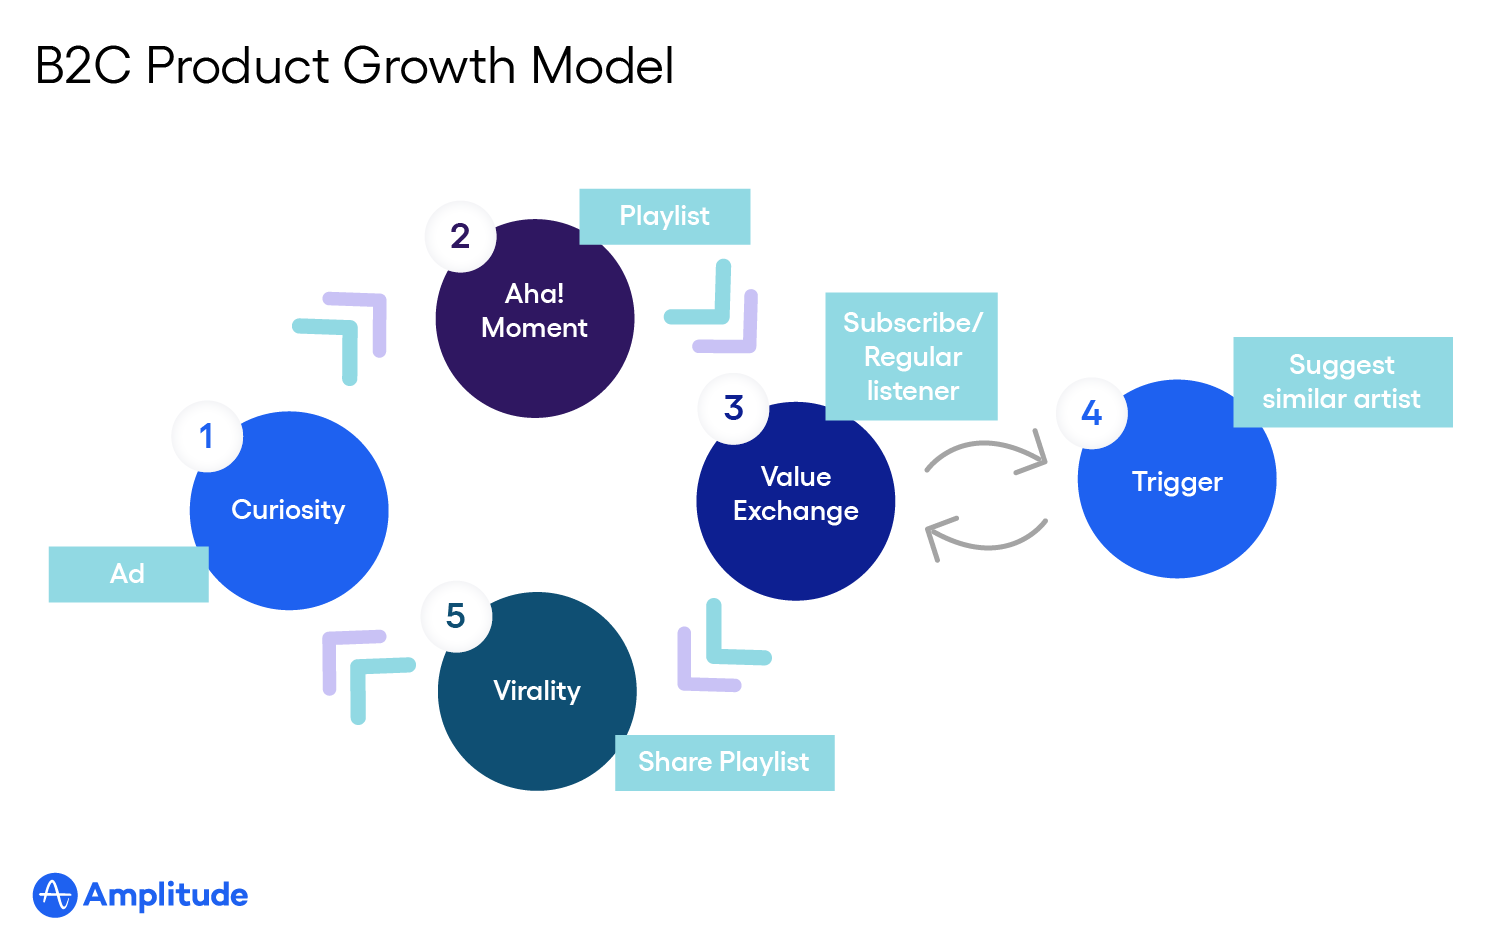 Product-led growth explained: B2C product growth model